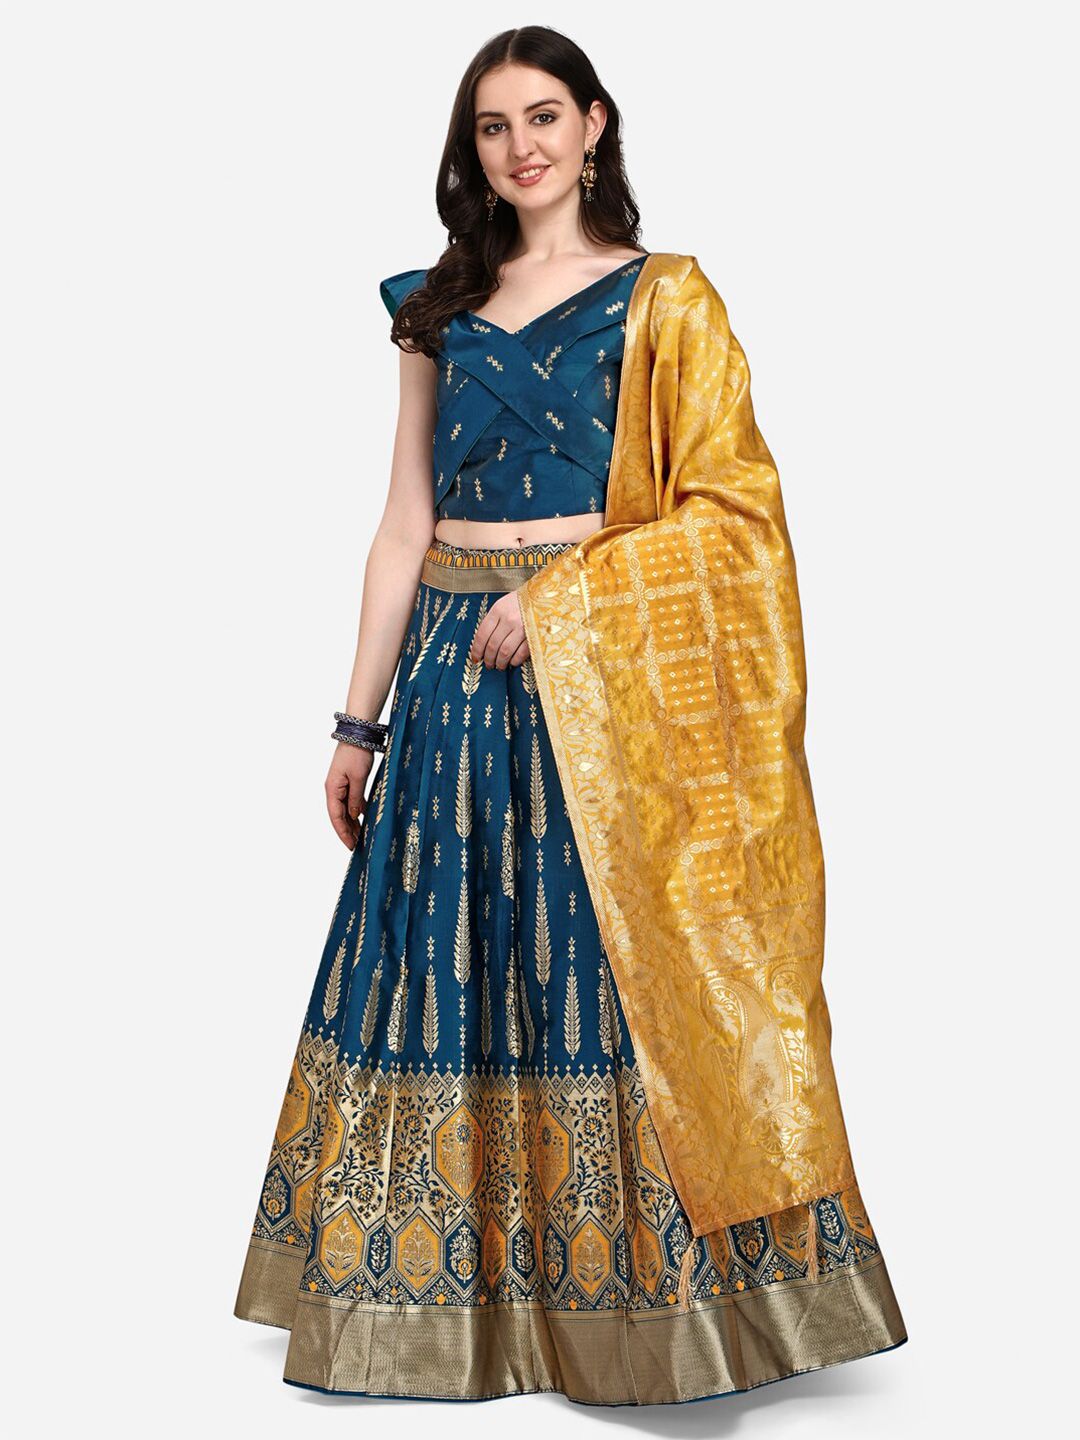 PURVAJA Teal & Mustard Ready to Wear Lehenga & Unstitched Blouse With Dupatta Price in India